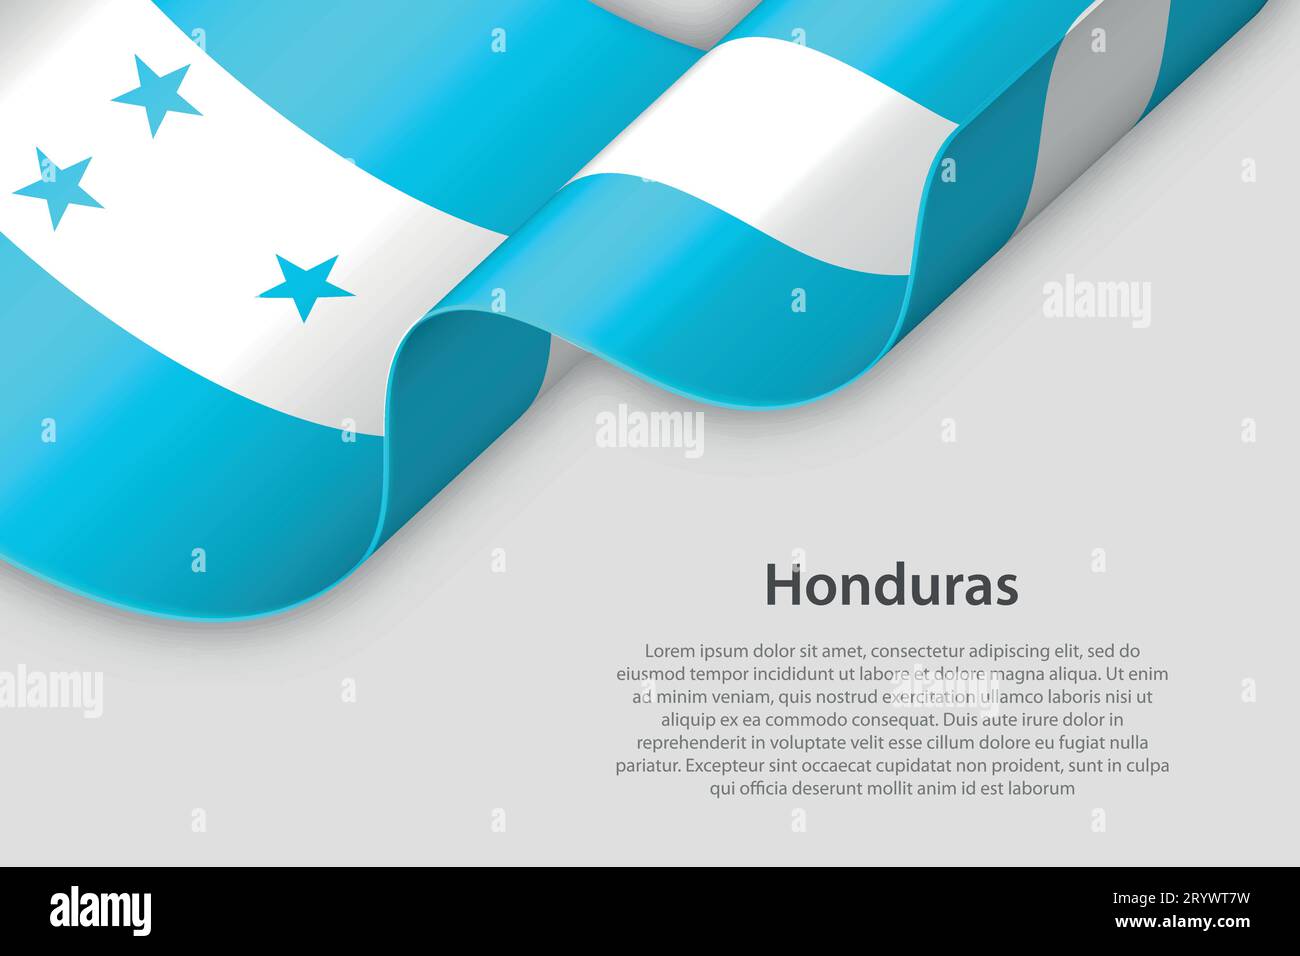 3d ribbon with national flag Honduras isolated on white background with copyspace Stock Vector